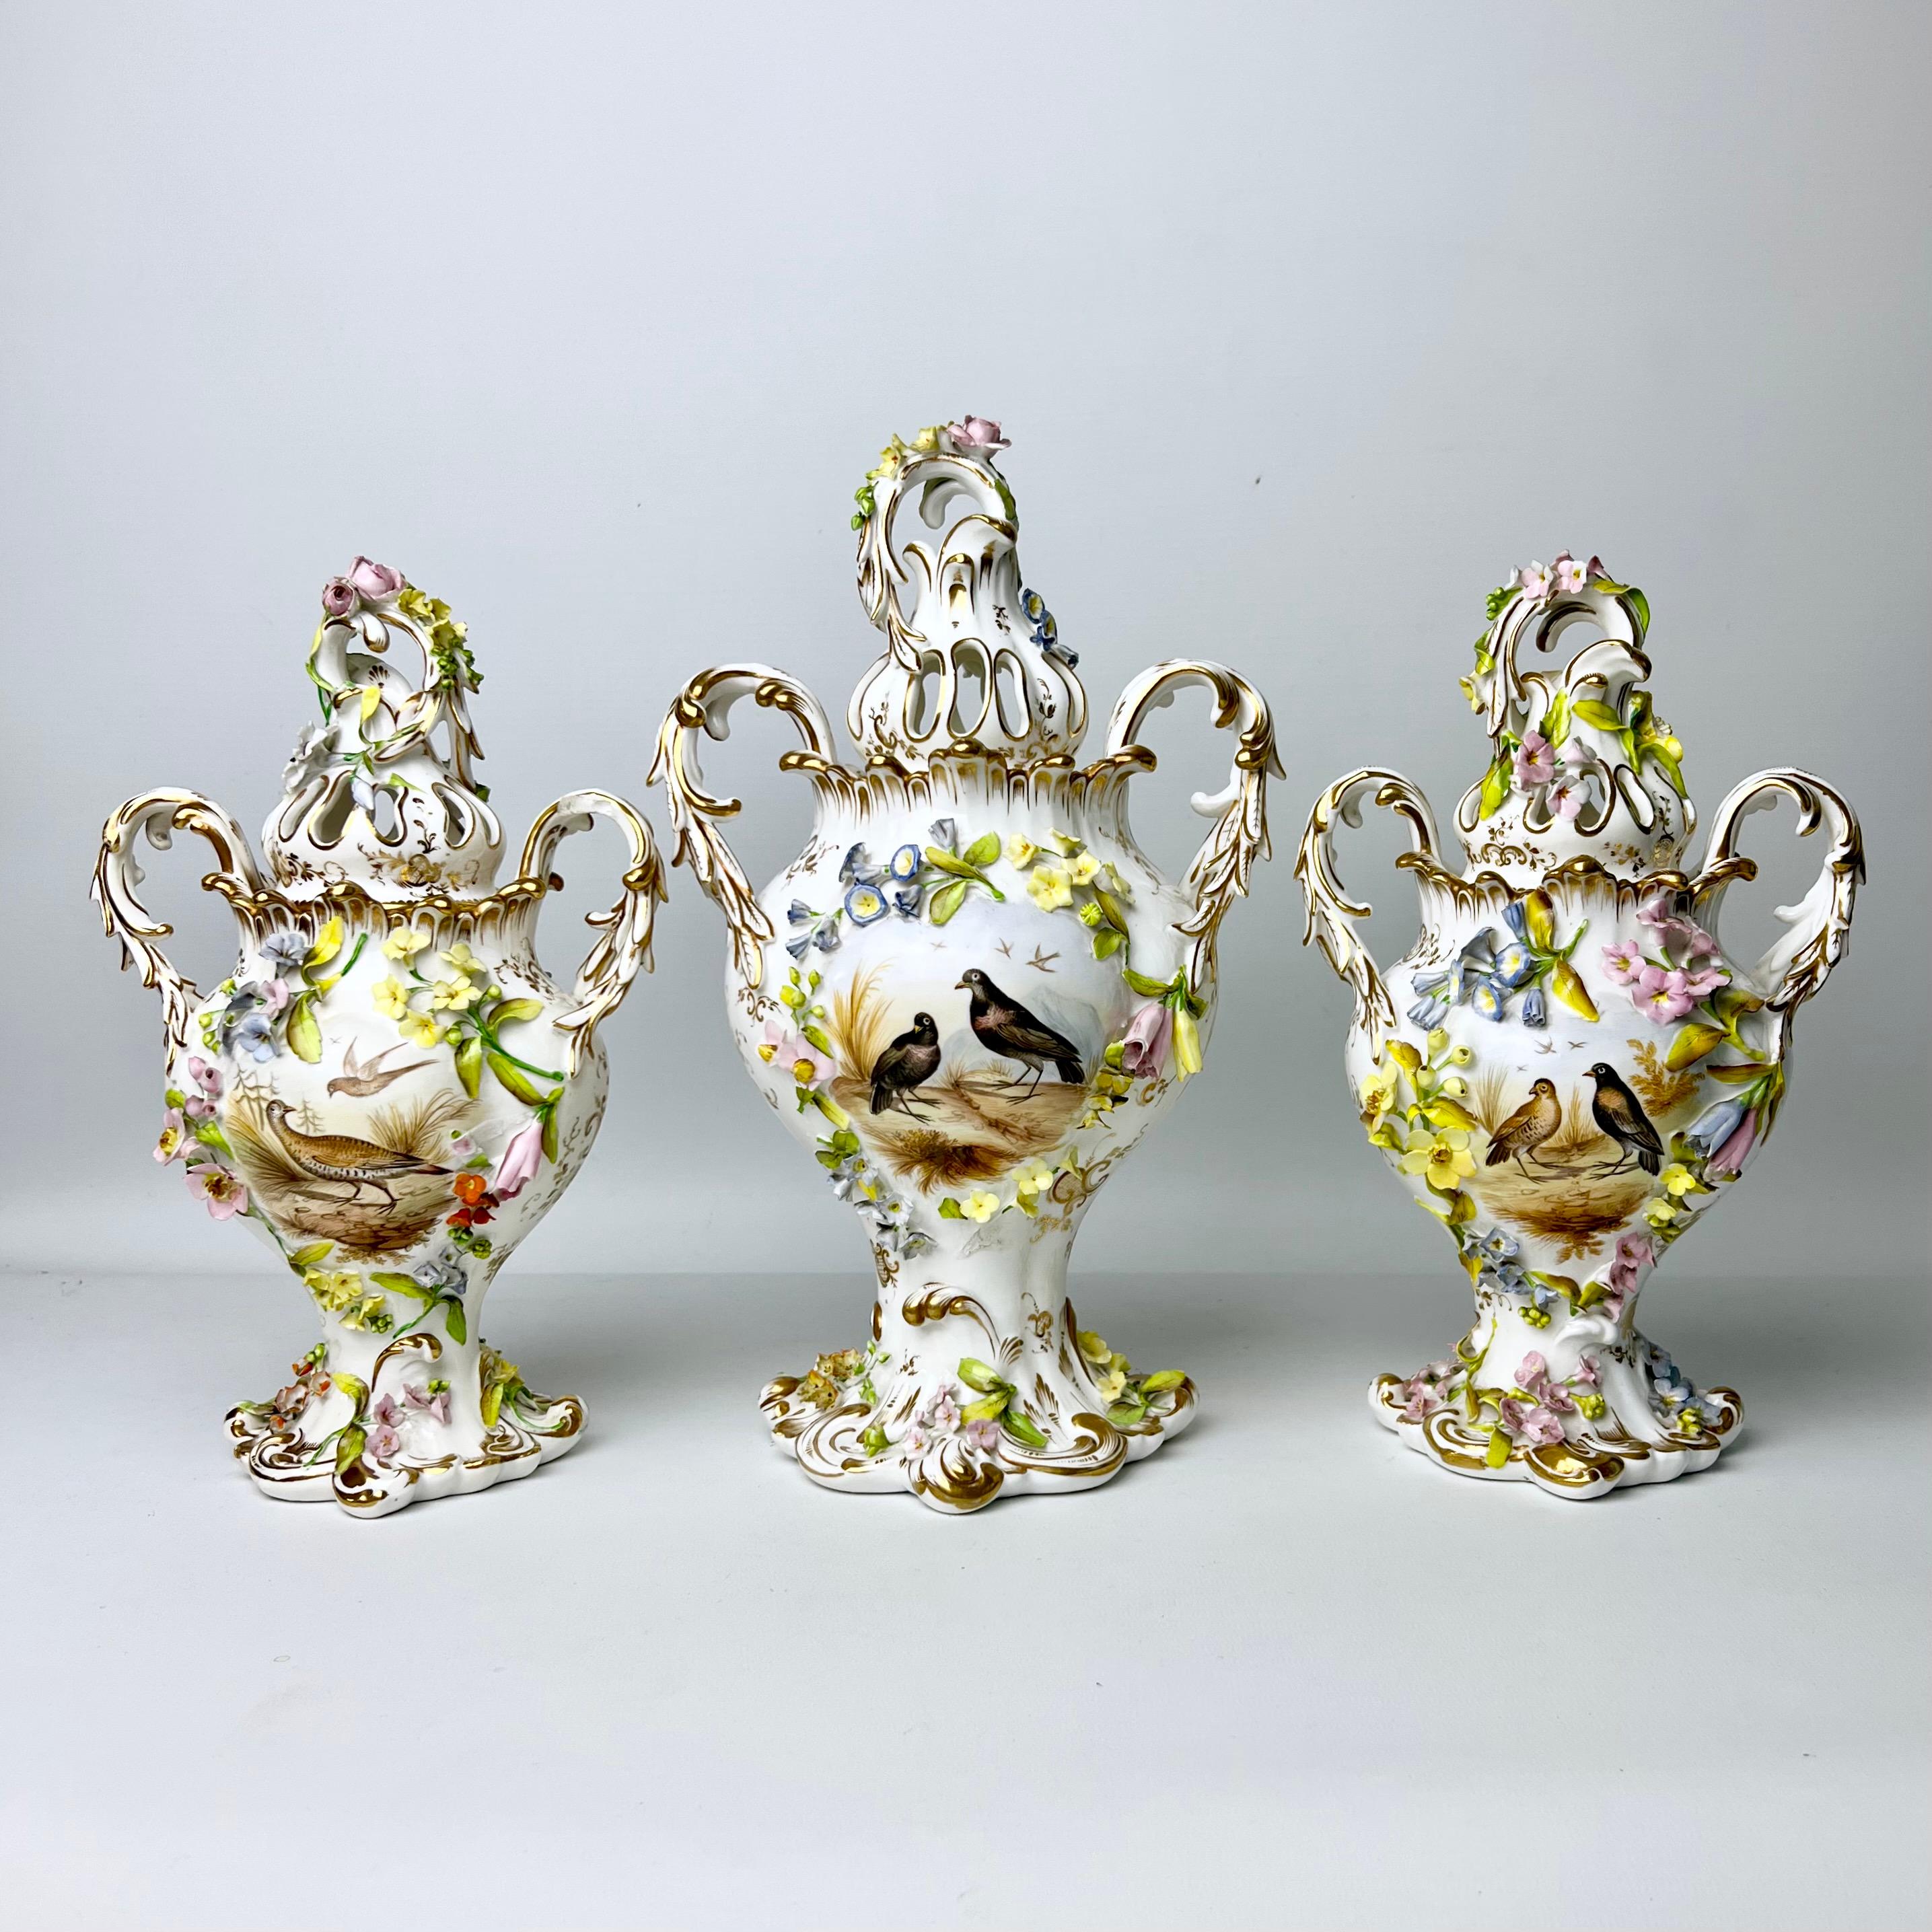 On offer is a stunning garniture of three potpourri vases with covers made by H & R Daniel in about 1840. The vases are from the Rococo Revival period, richly decorated with encrusted flowers in the 